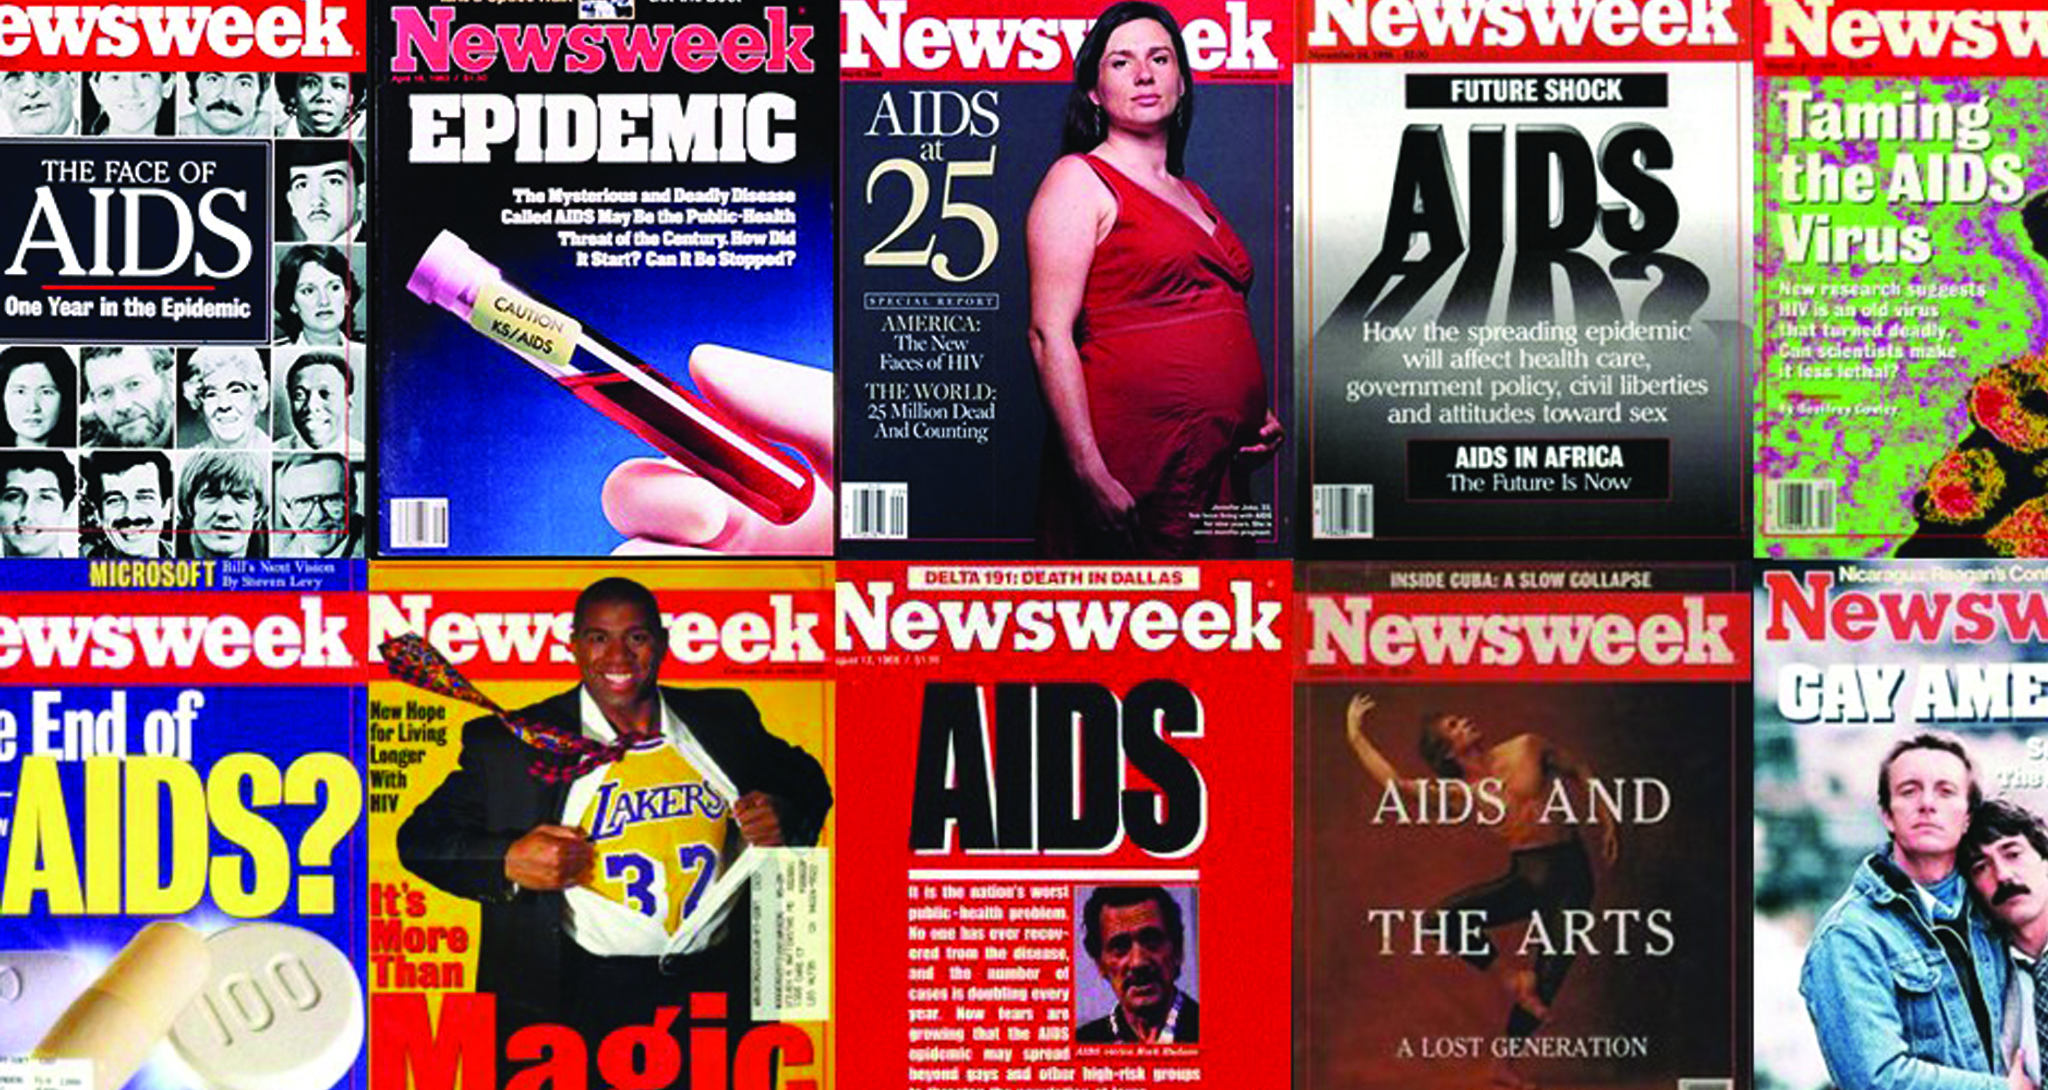 Old media coverage of HIV/AIDS